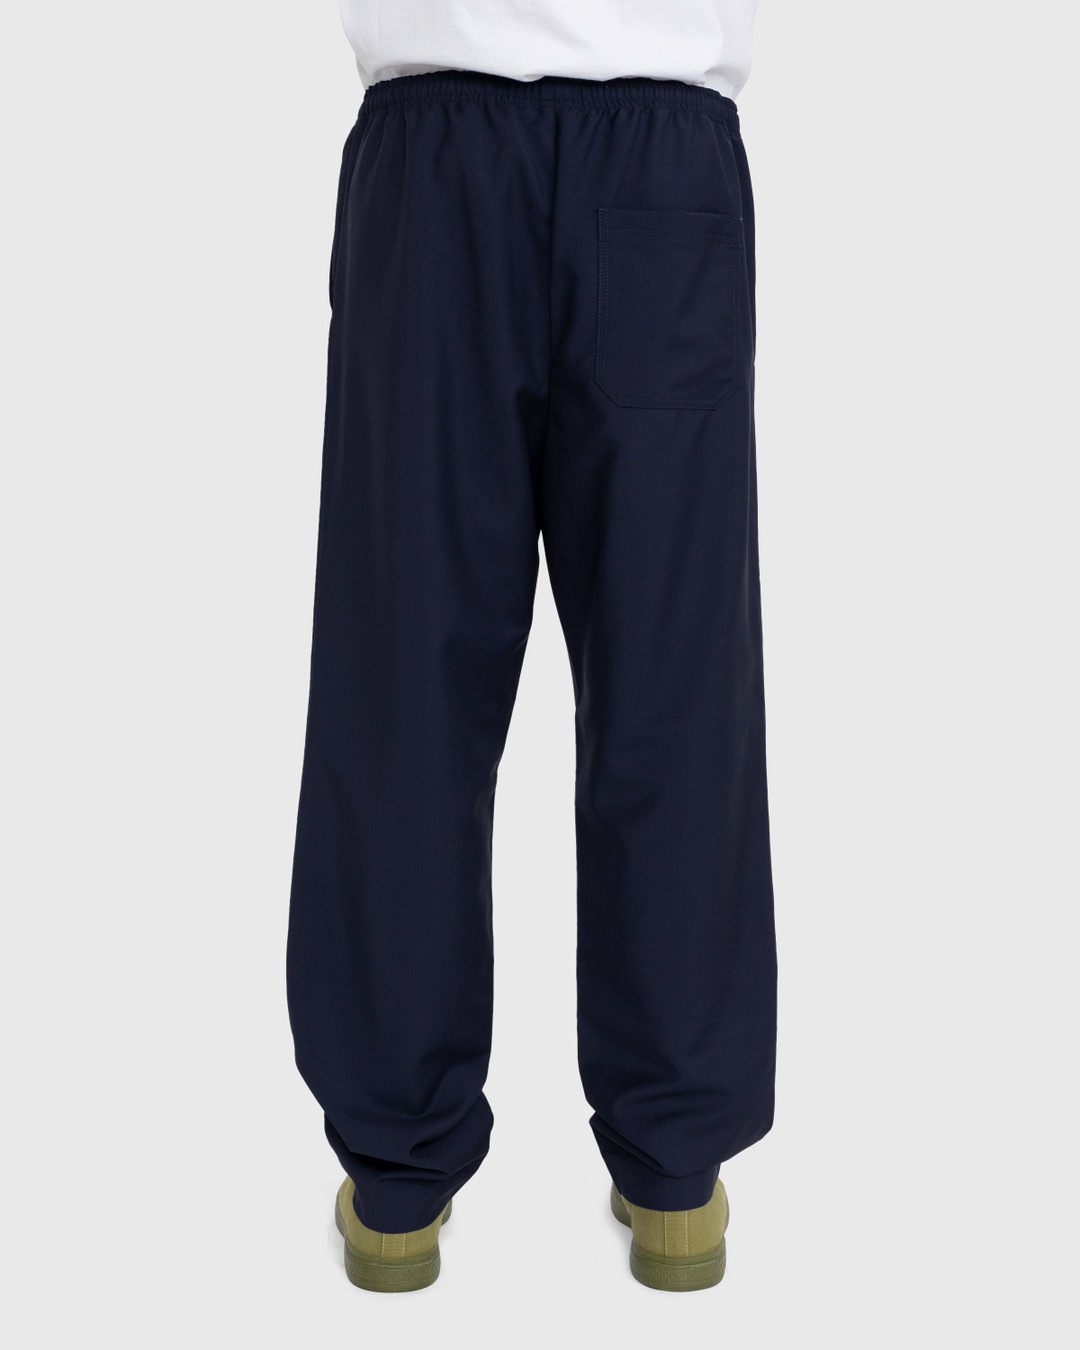 Acne Studios – Loose Fit Drawstring Trousers Blue